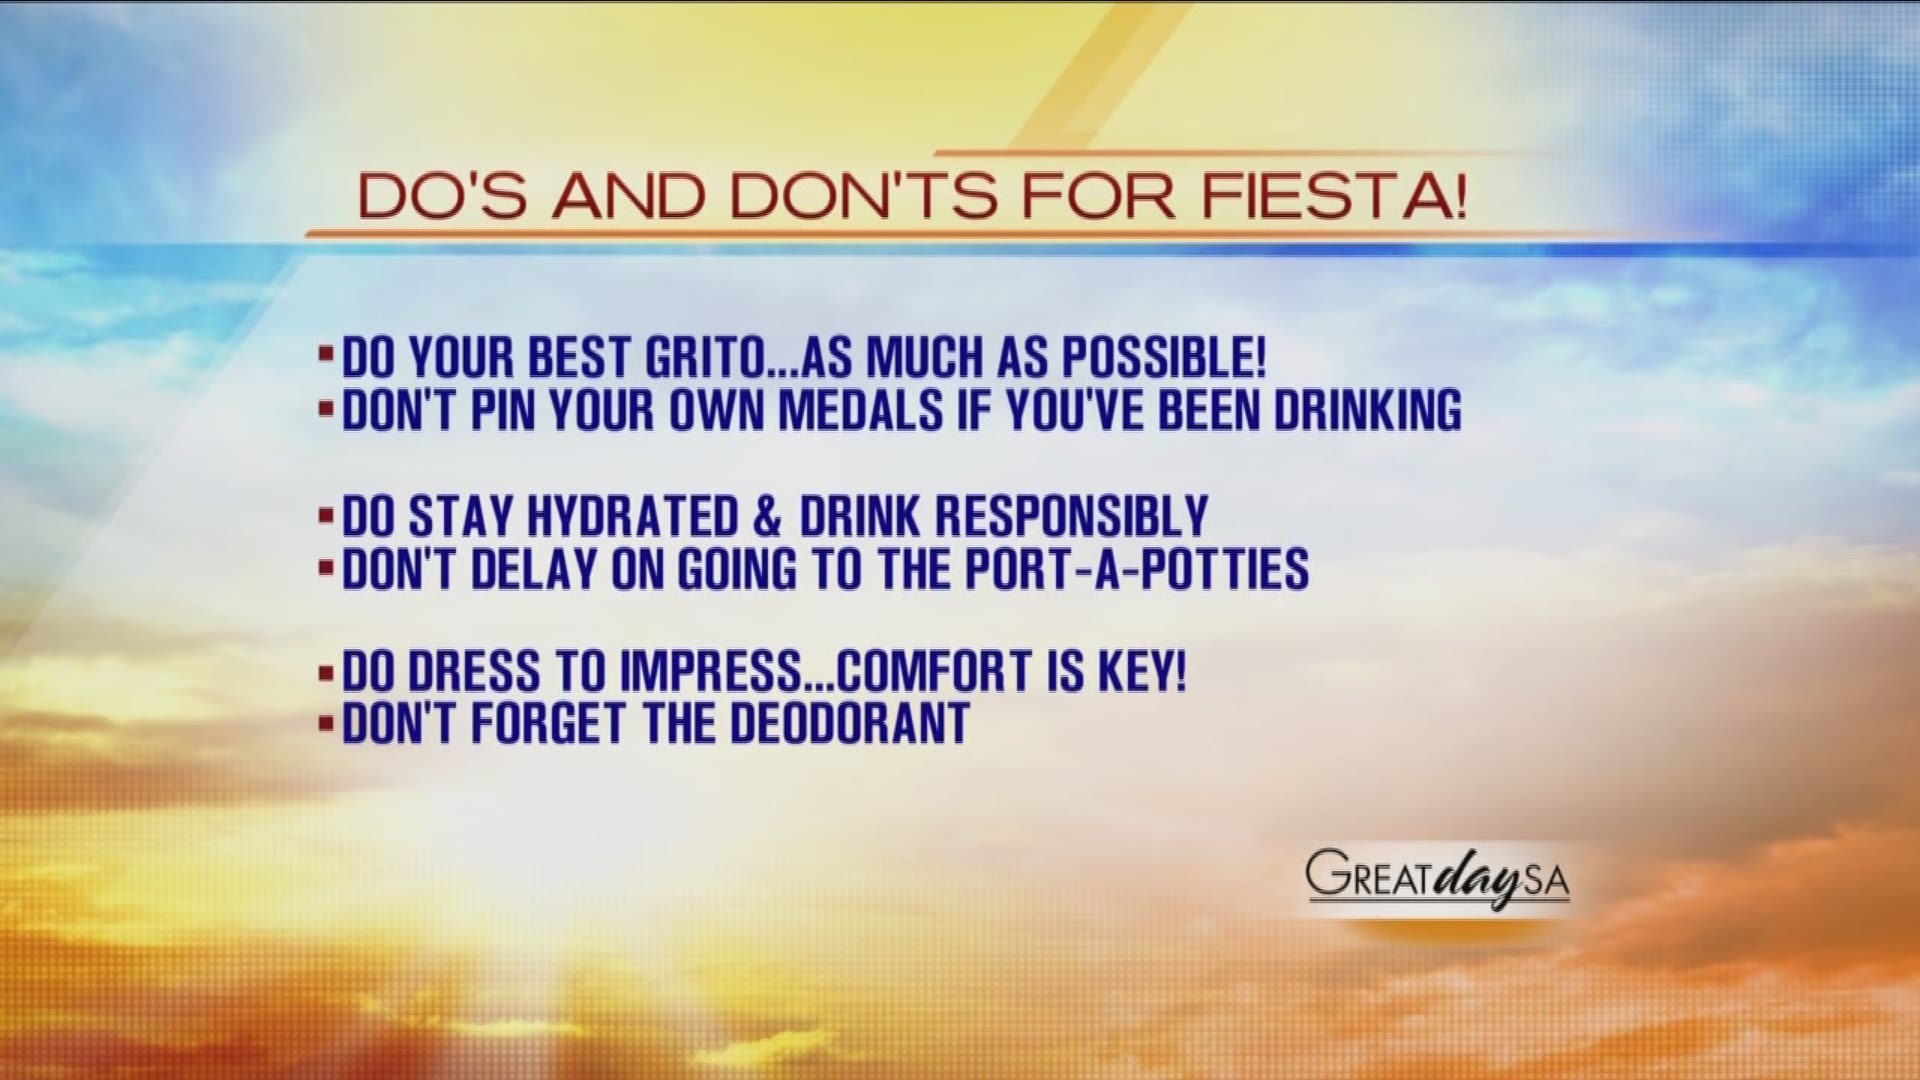 DO'S AND DONT'S OF FIESTA